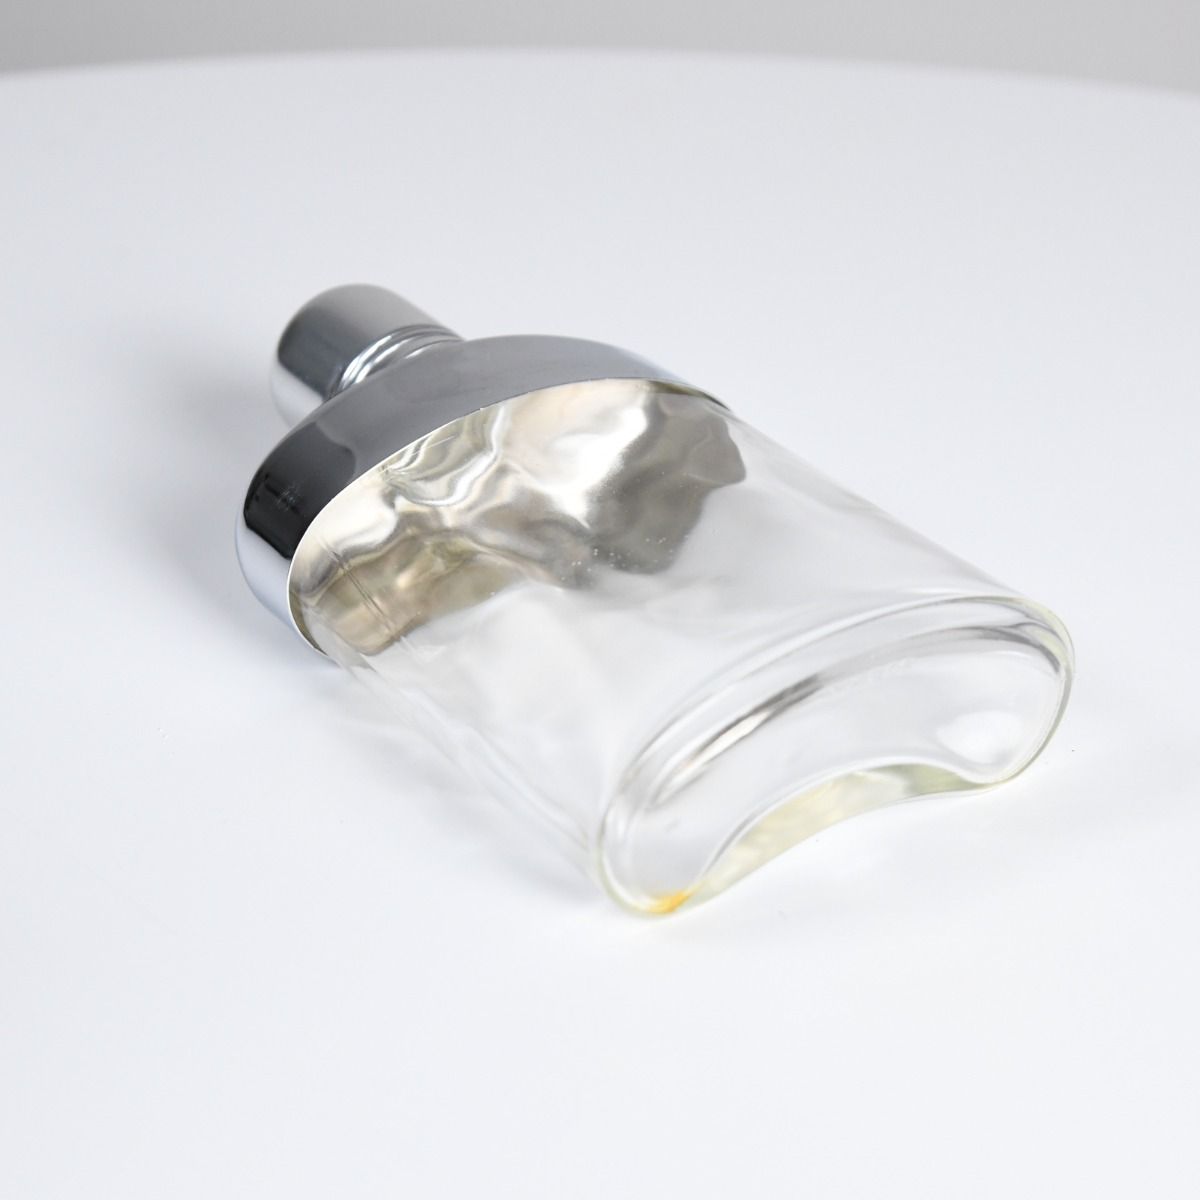 Glass Hip Flask With Leather Case